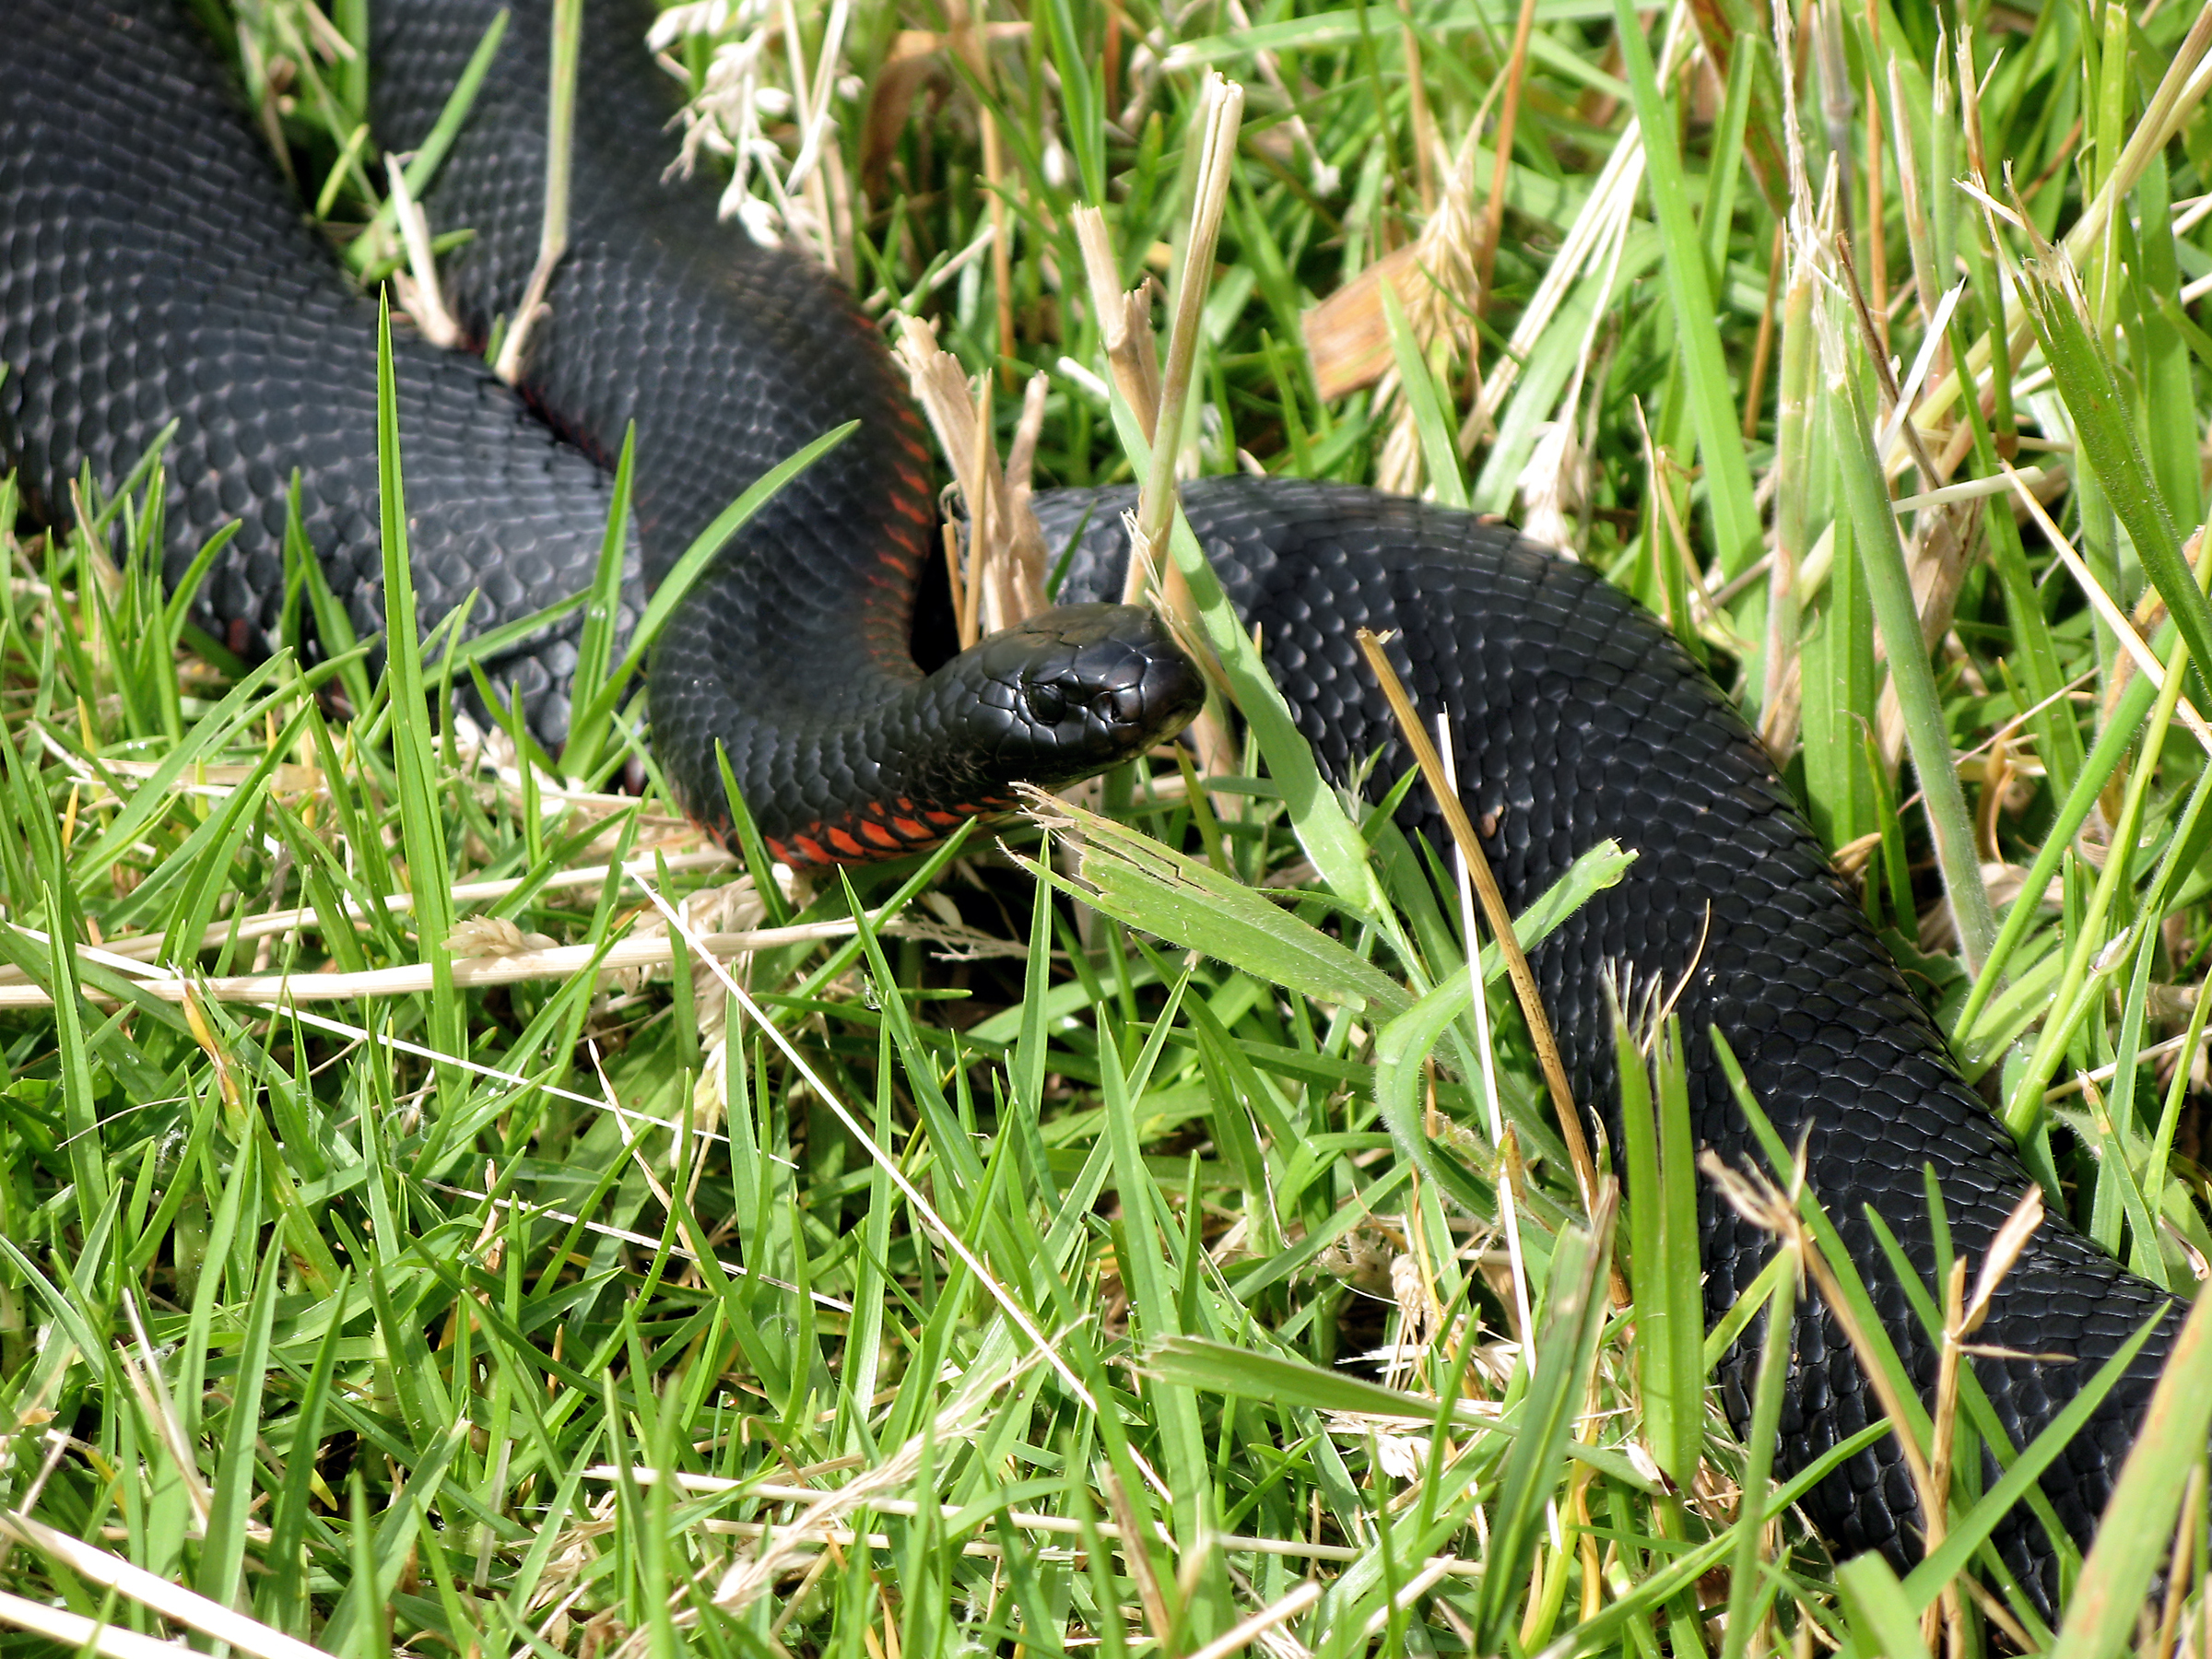 Red Belly Black Snakes